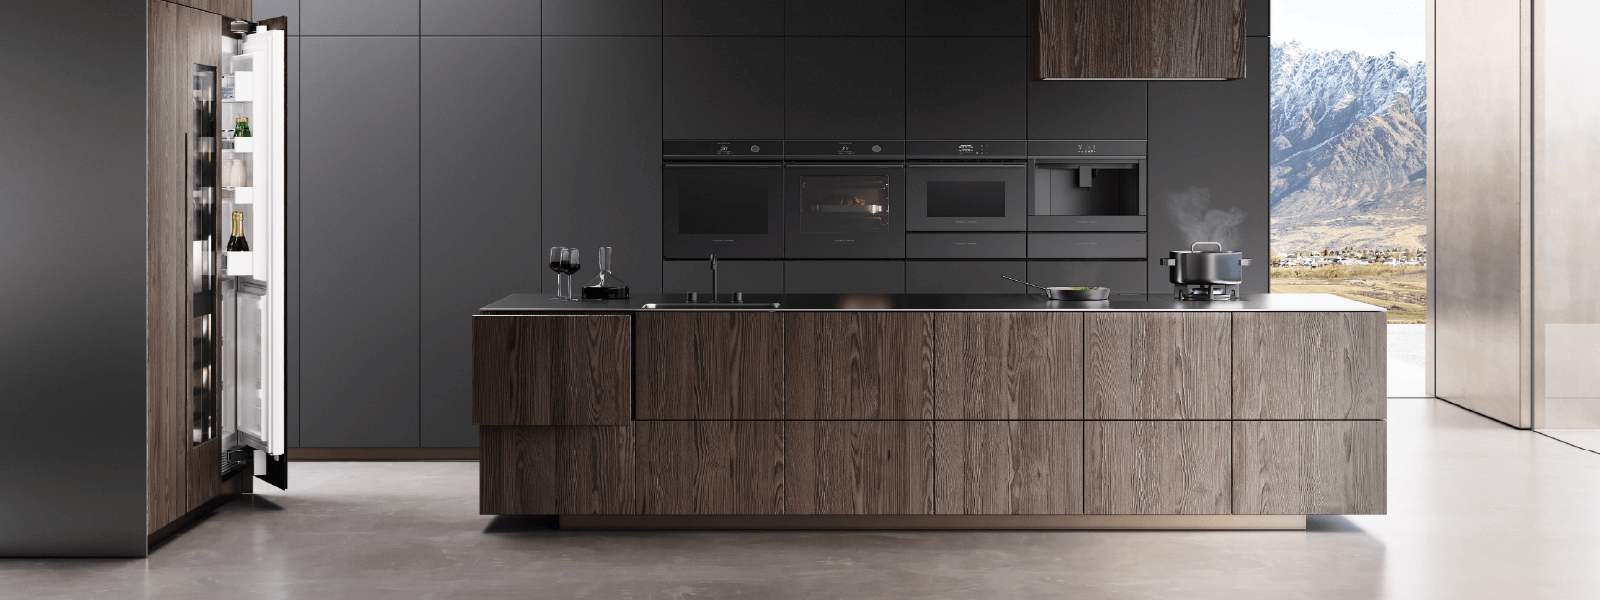 5-Year Warranty on Selected Fisher & Paykel Appliances at Hart & Co